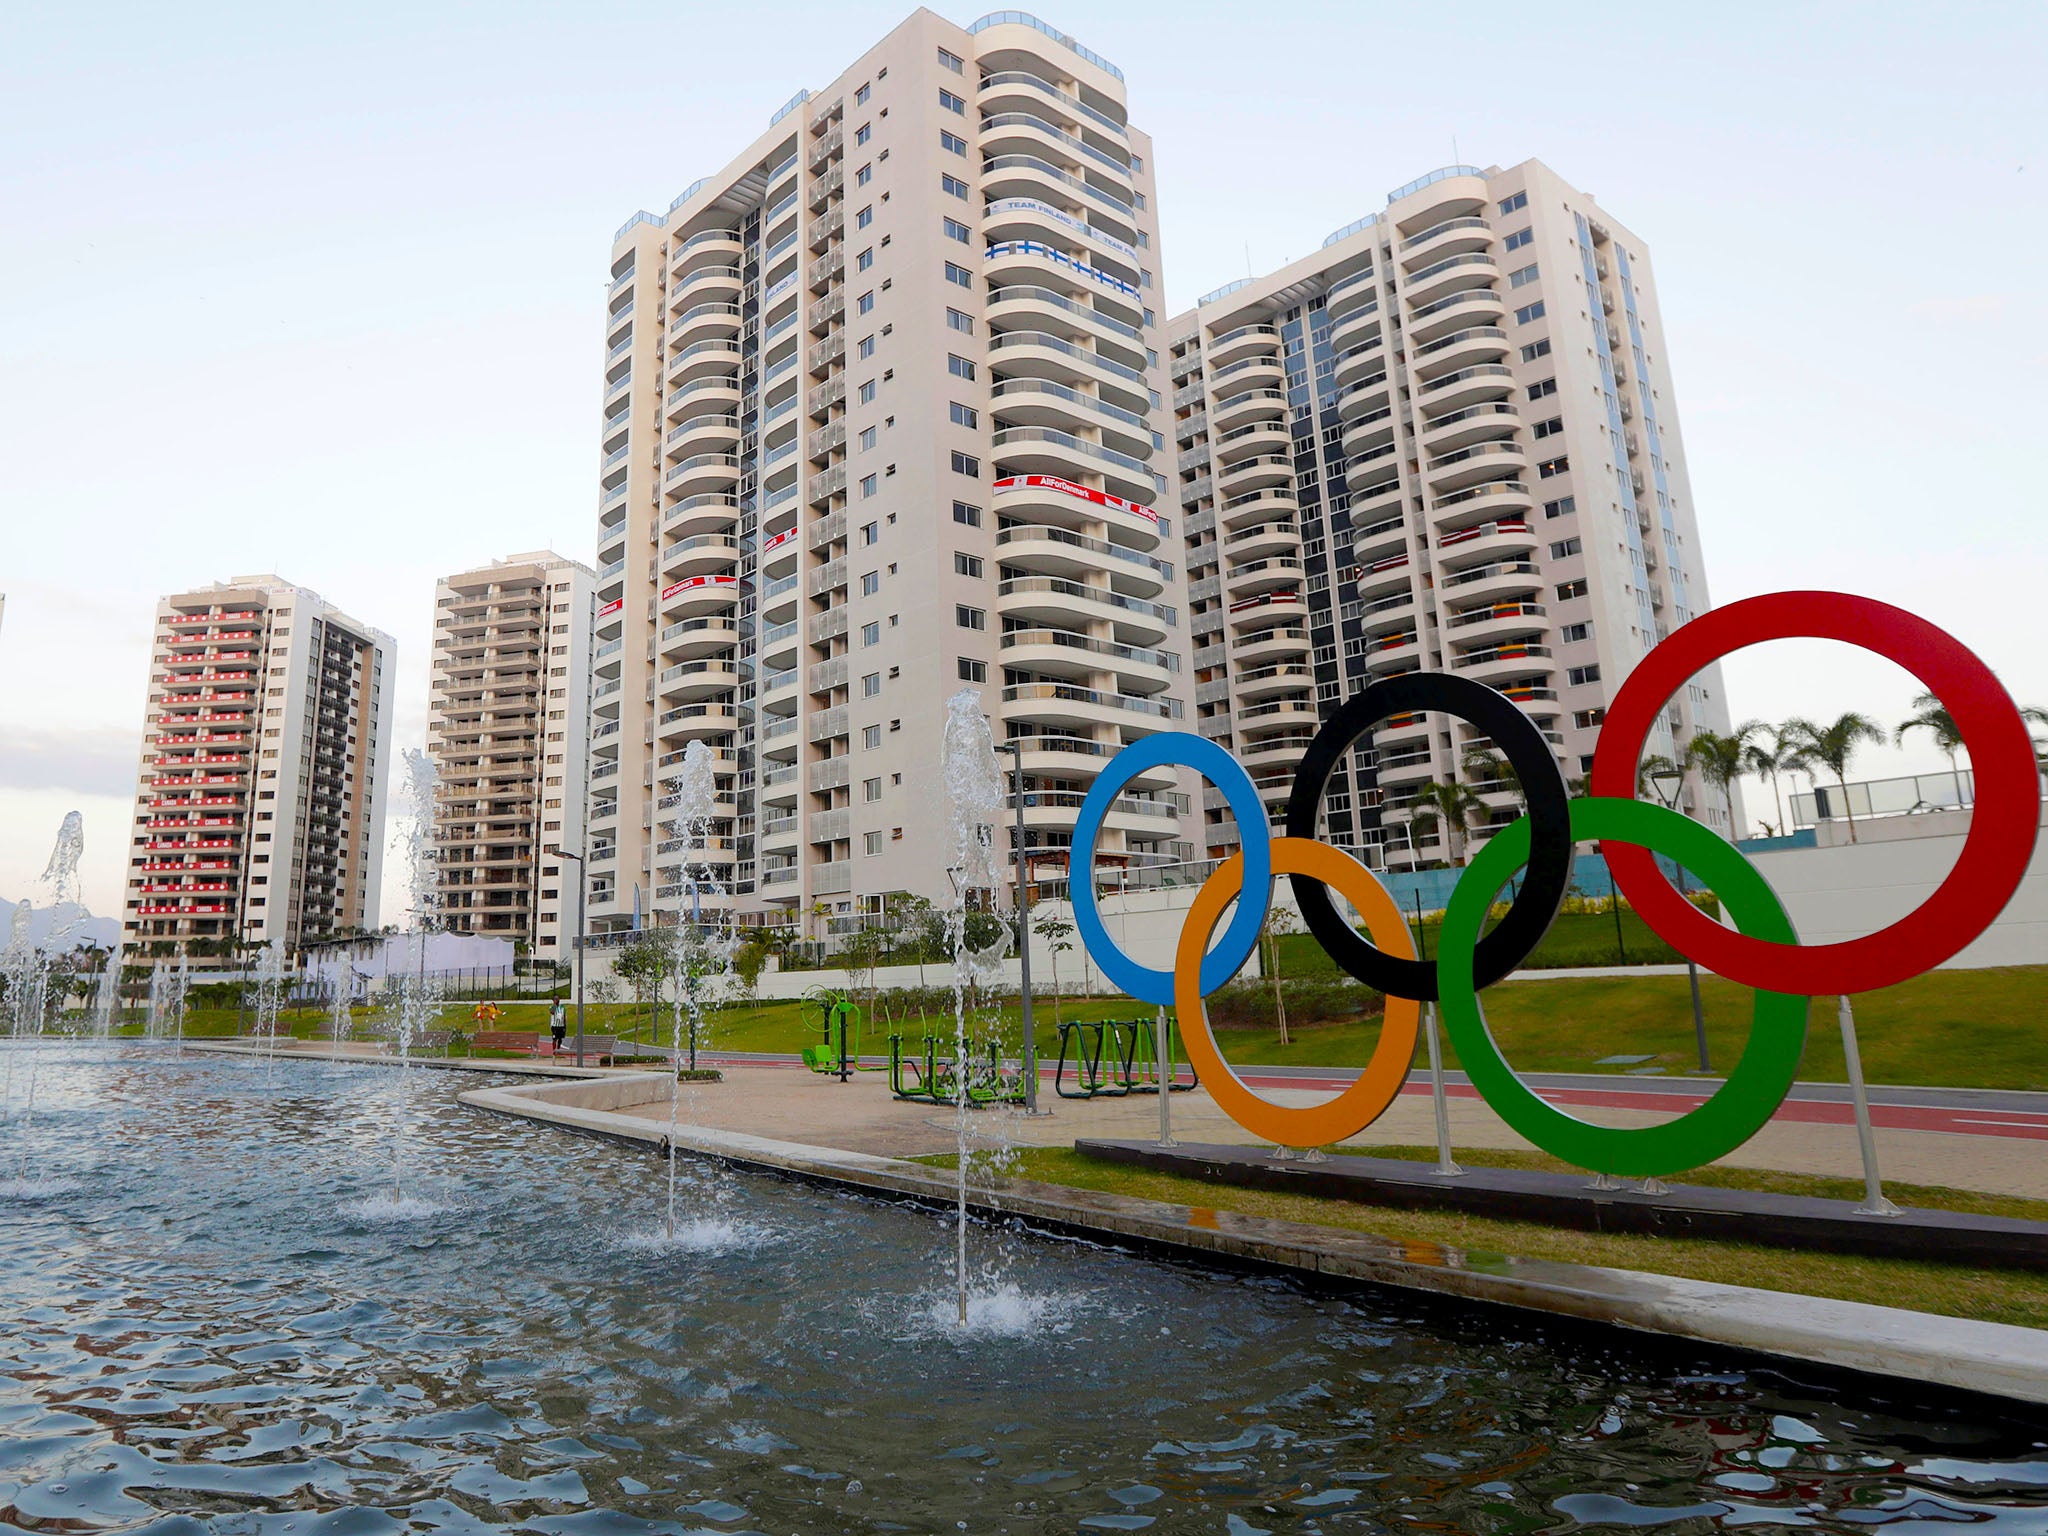 The Olympic village will house around 18,000 athletes at the height of the Games